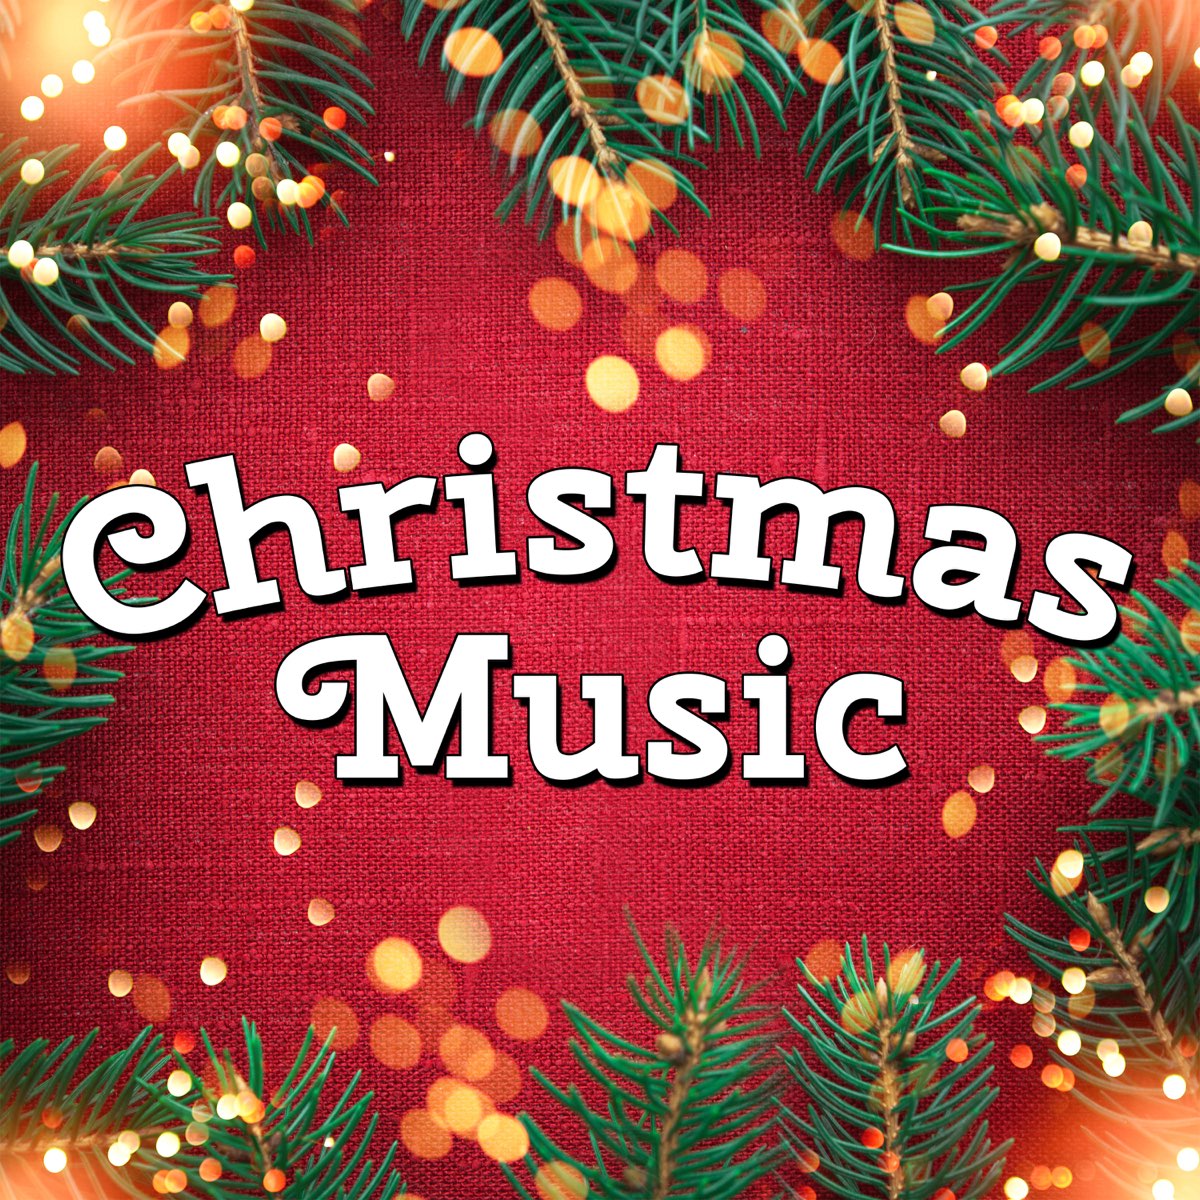 ‎Christmas Music - Album by Various Artists - Apple Music